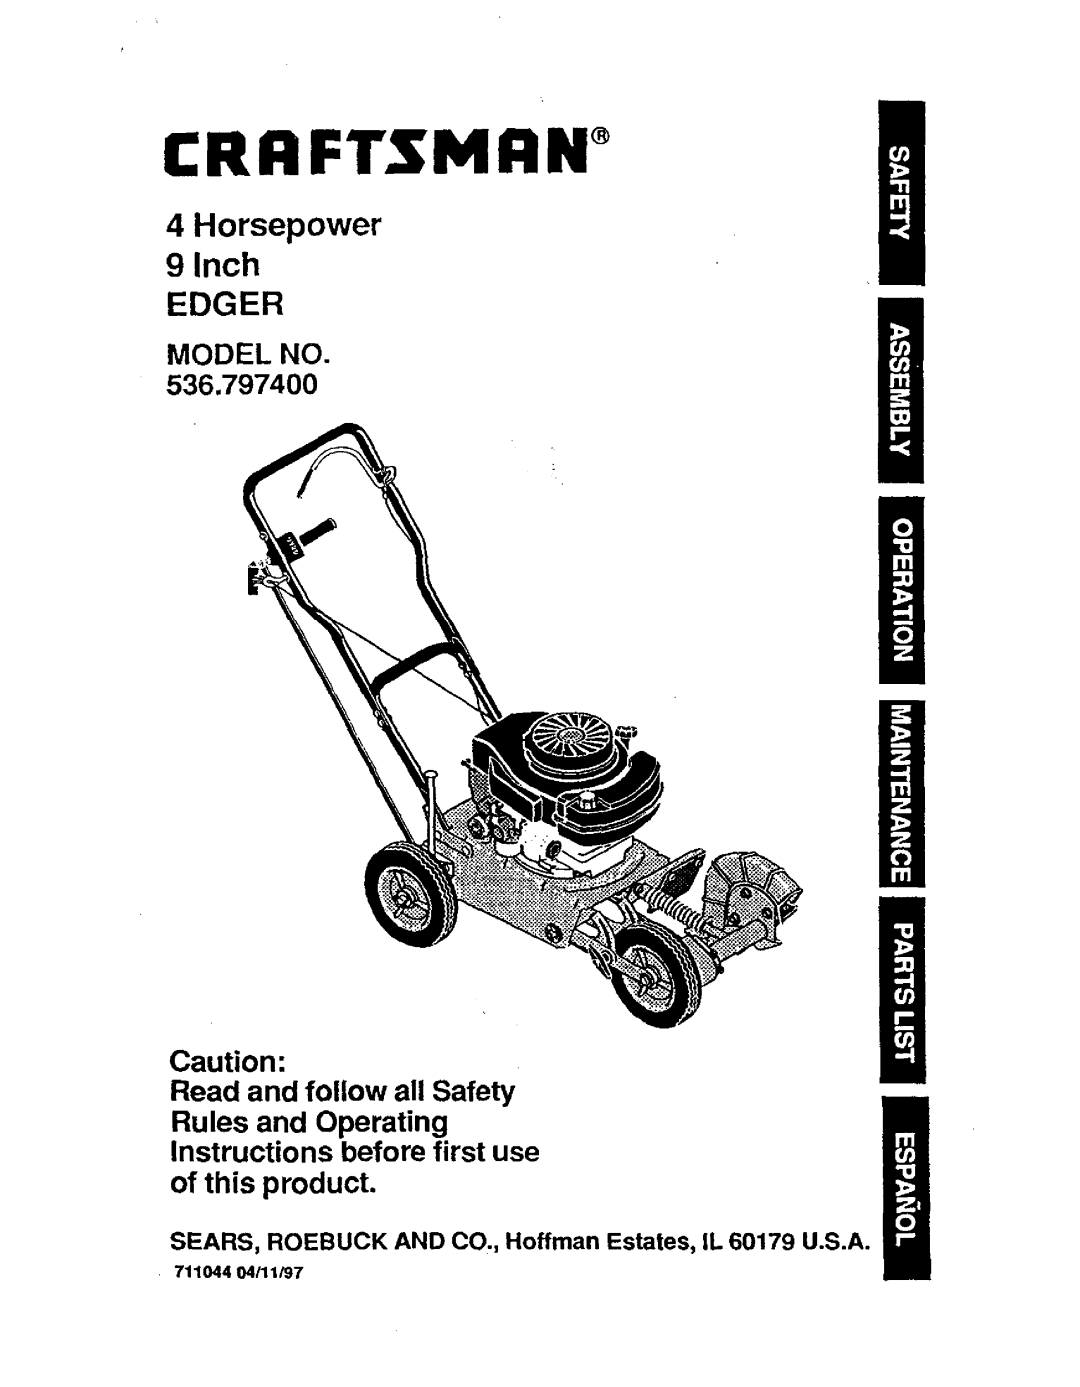 Craftsman 536.7974 operating instructions 4Horsepower 9Inch EDGER, CRR FTSMI tW, Model No, Read and follow all Safety 